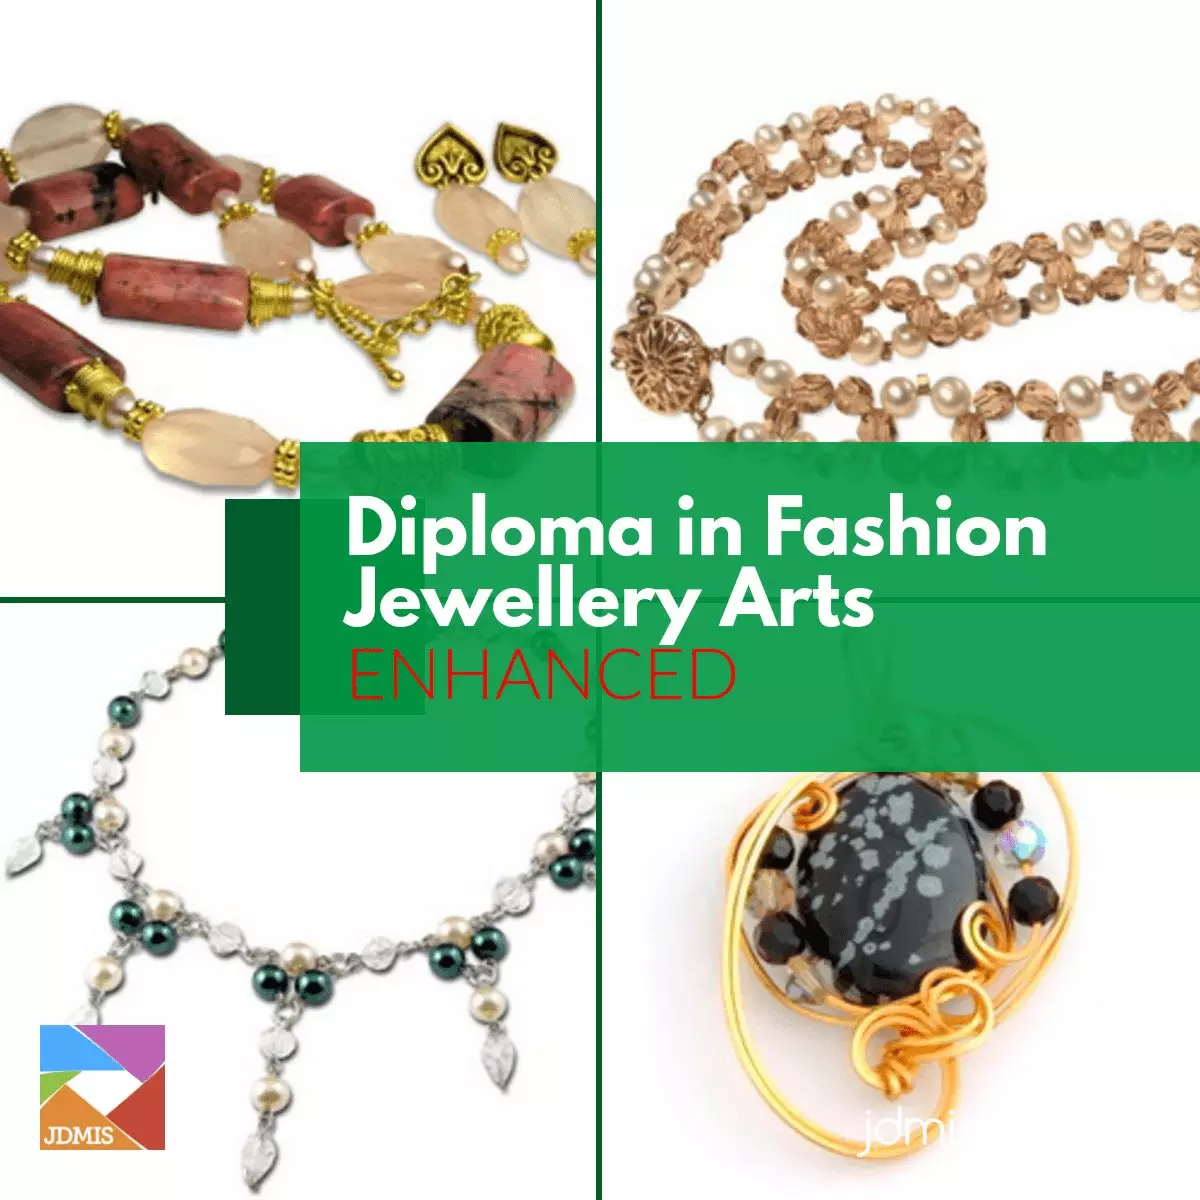 The fastest way to creating high quality, fashionable jewellery is by knowing what materials and pre-fabricated components to select and how to assemble...